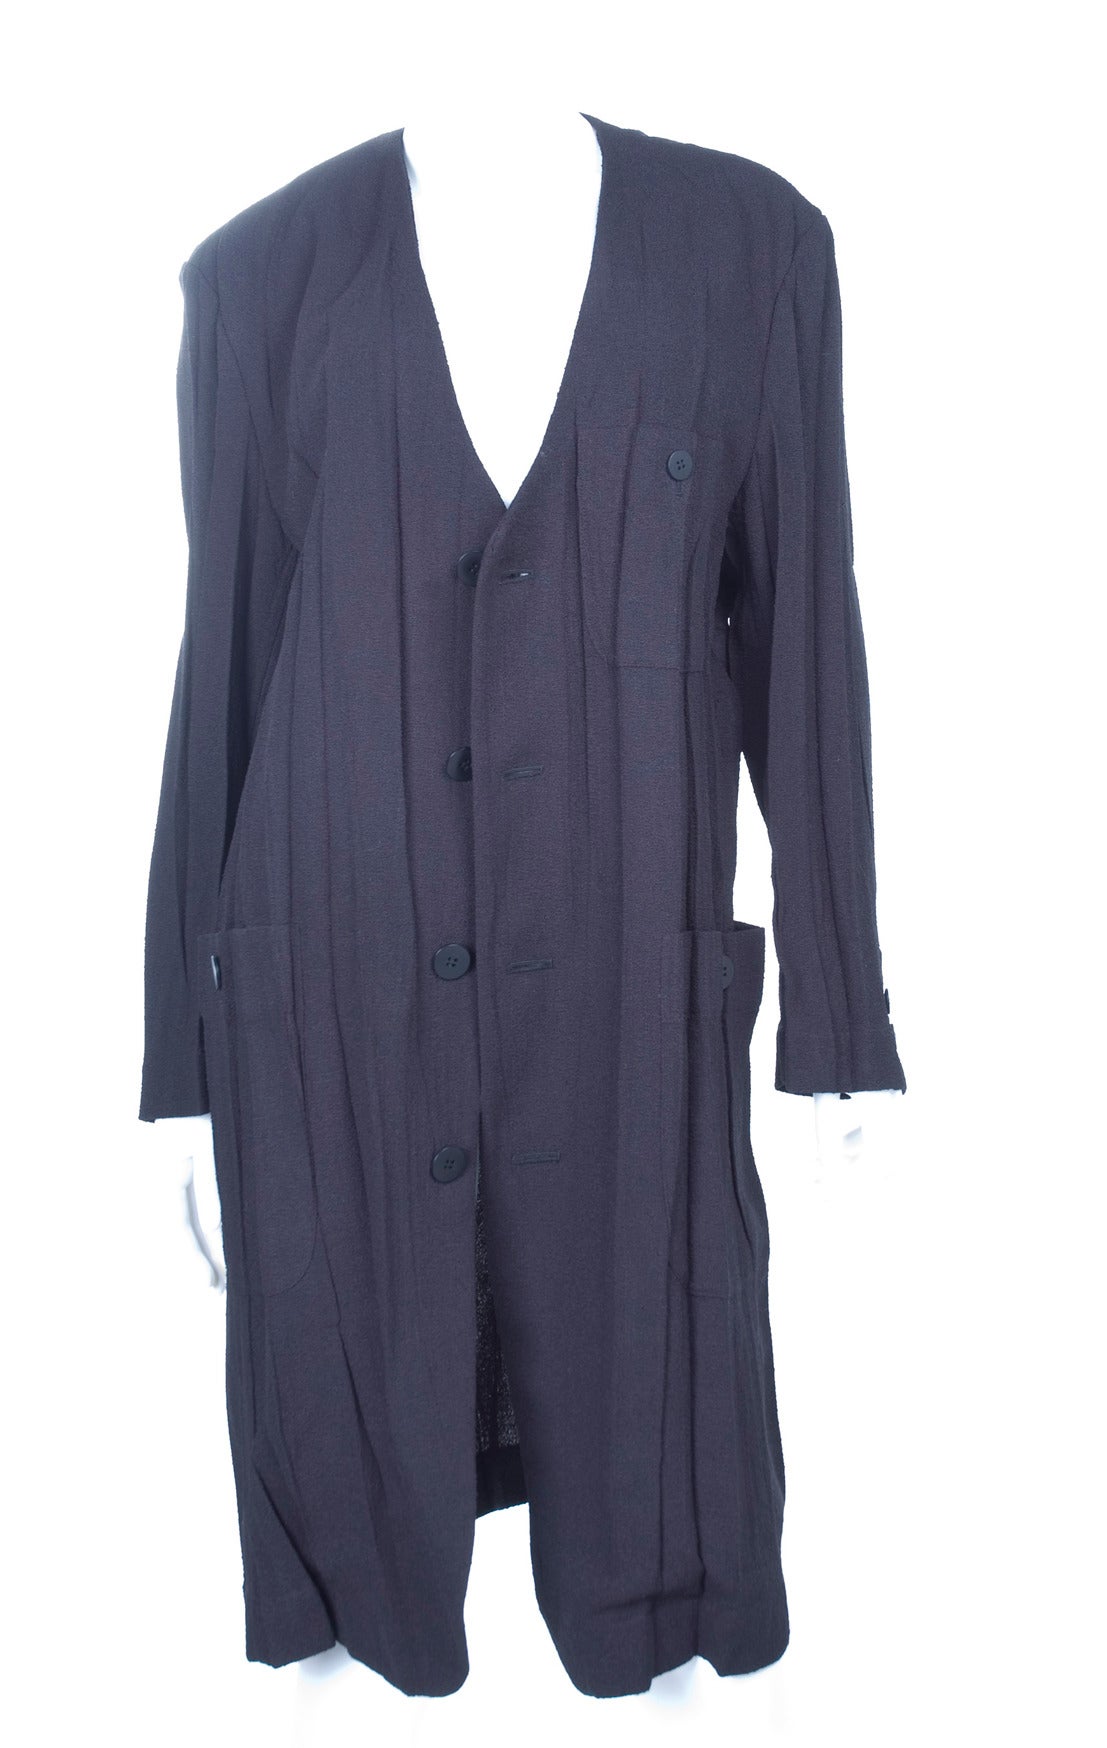 80's Issey Miyake Black Long Jacket or Coat.
In excellent condition.
Size L 

Measurements:
Length 96 cm - 38